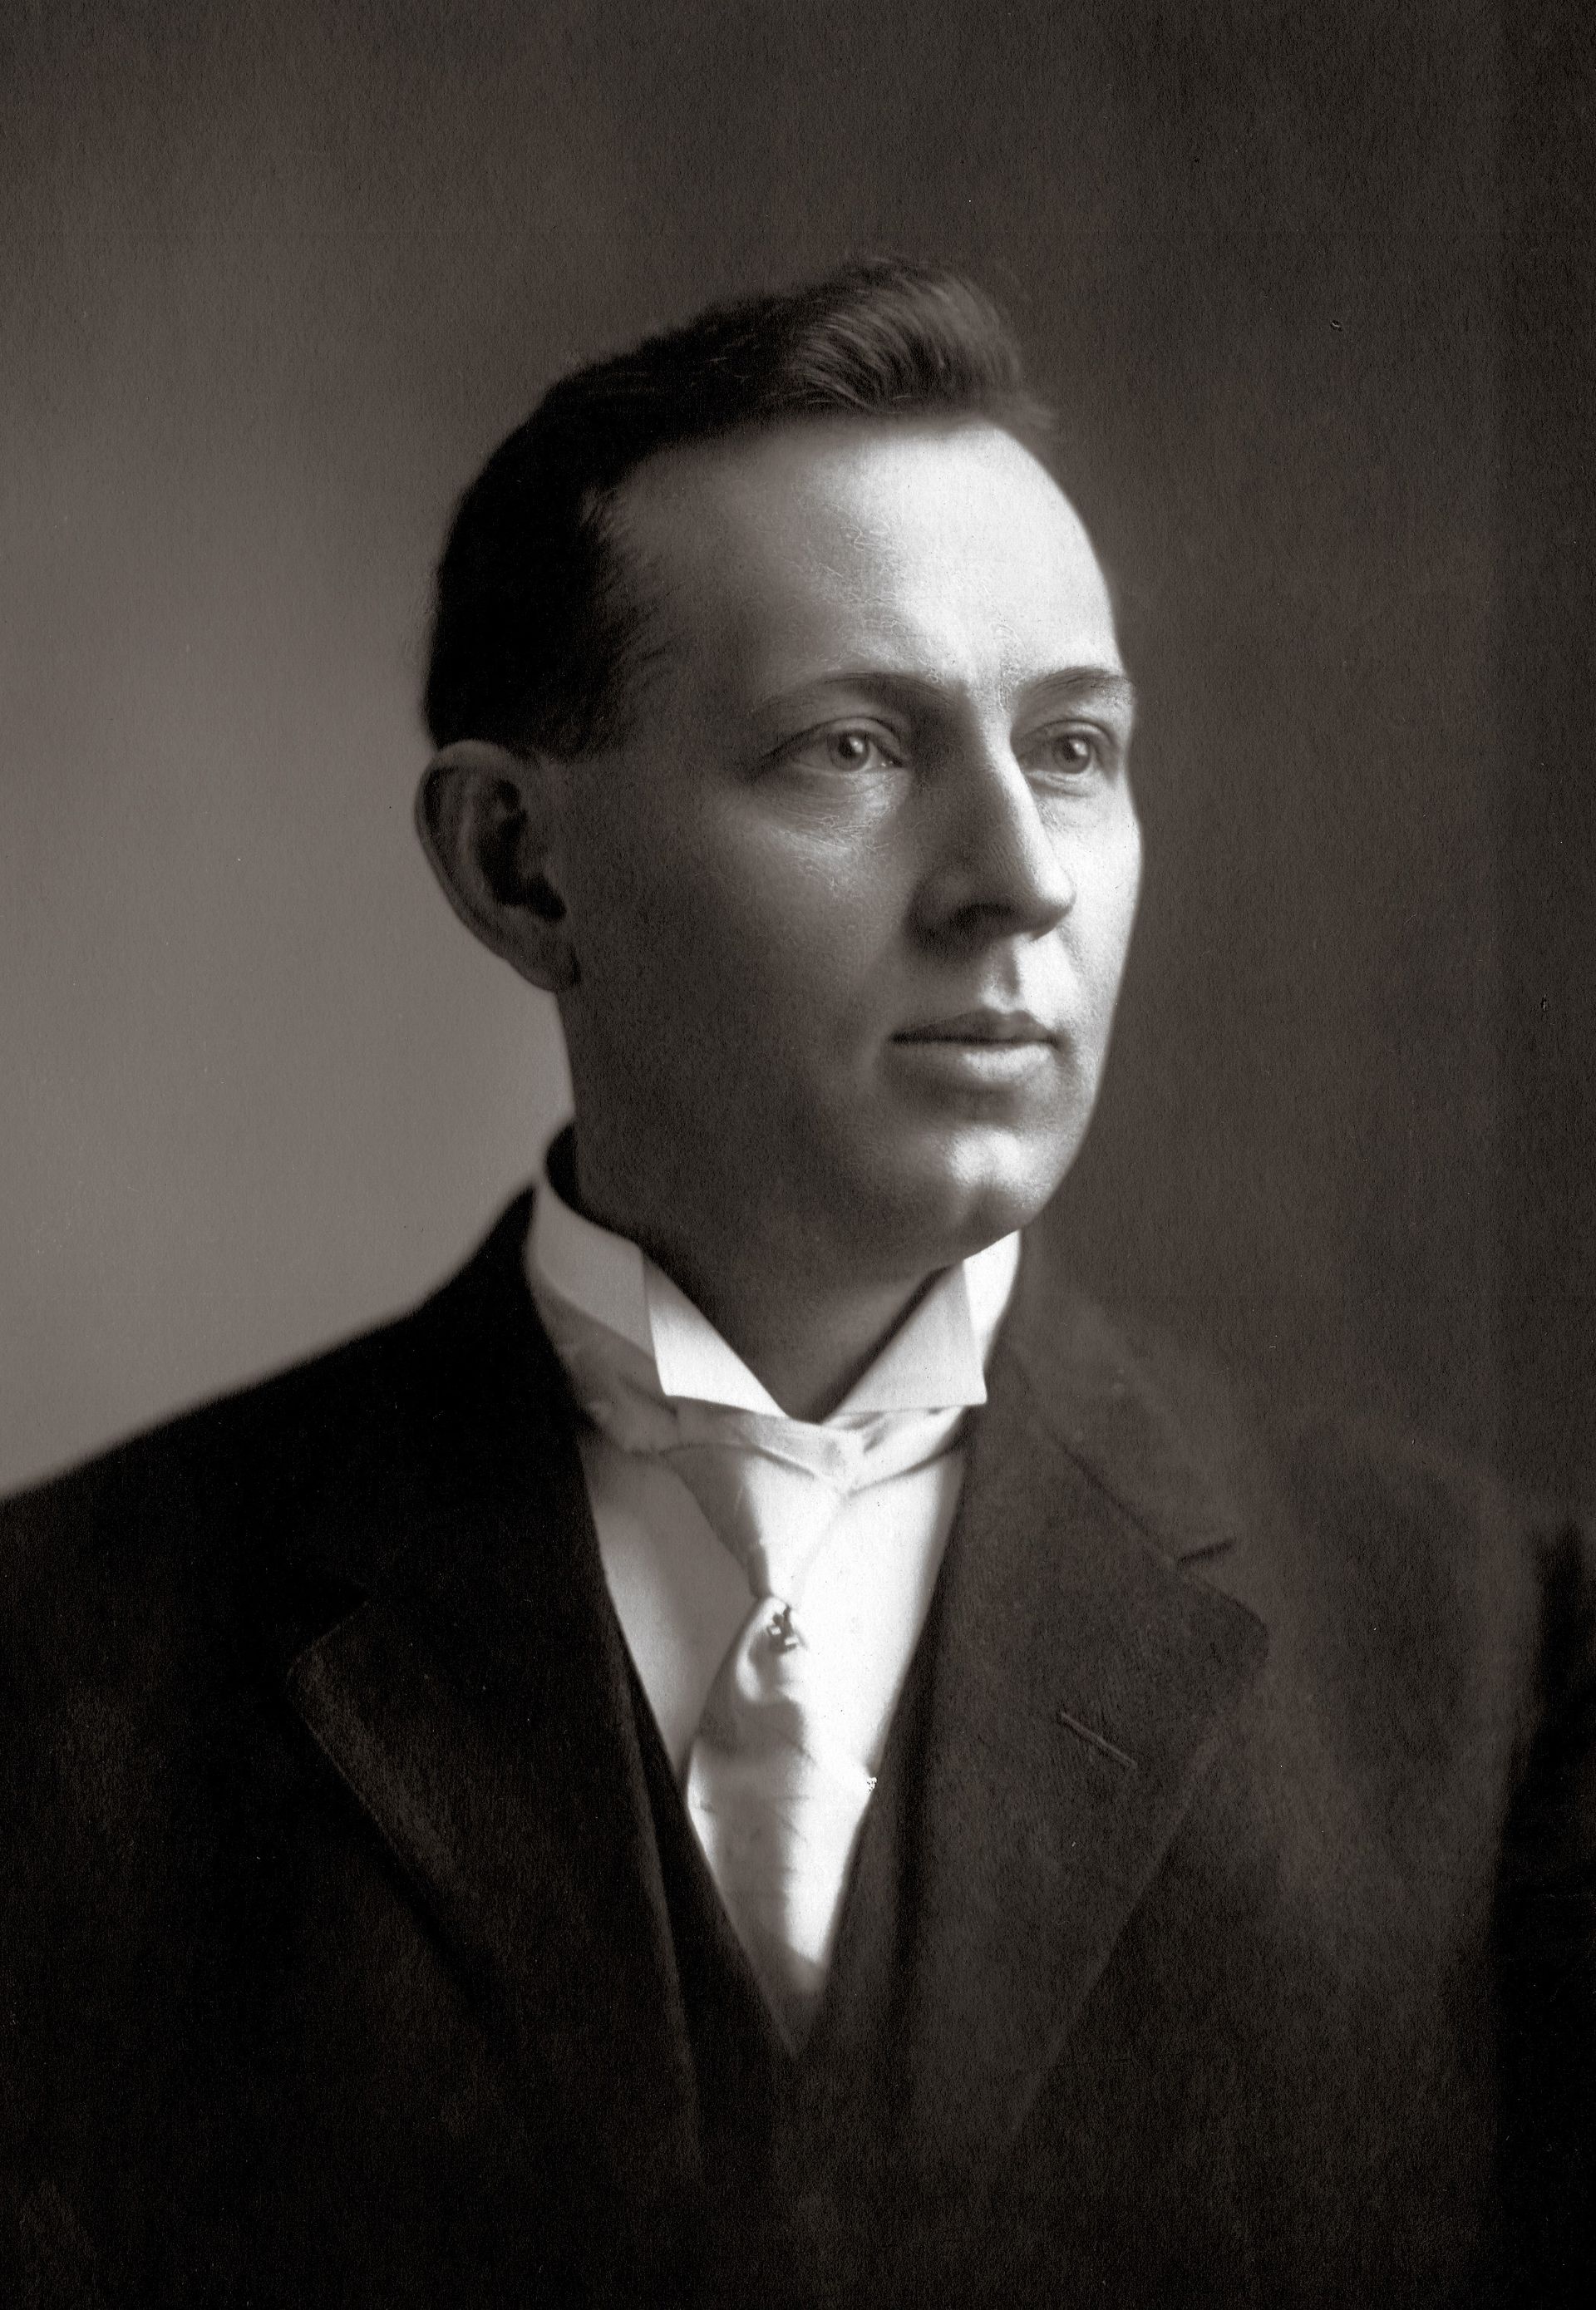 Elder Joseph Fielding Smith shortly after being ordained an Apostle in 1910. Teachings of Presidents of the Church: Joseph Fielding Smith (2013), 262